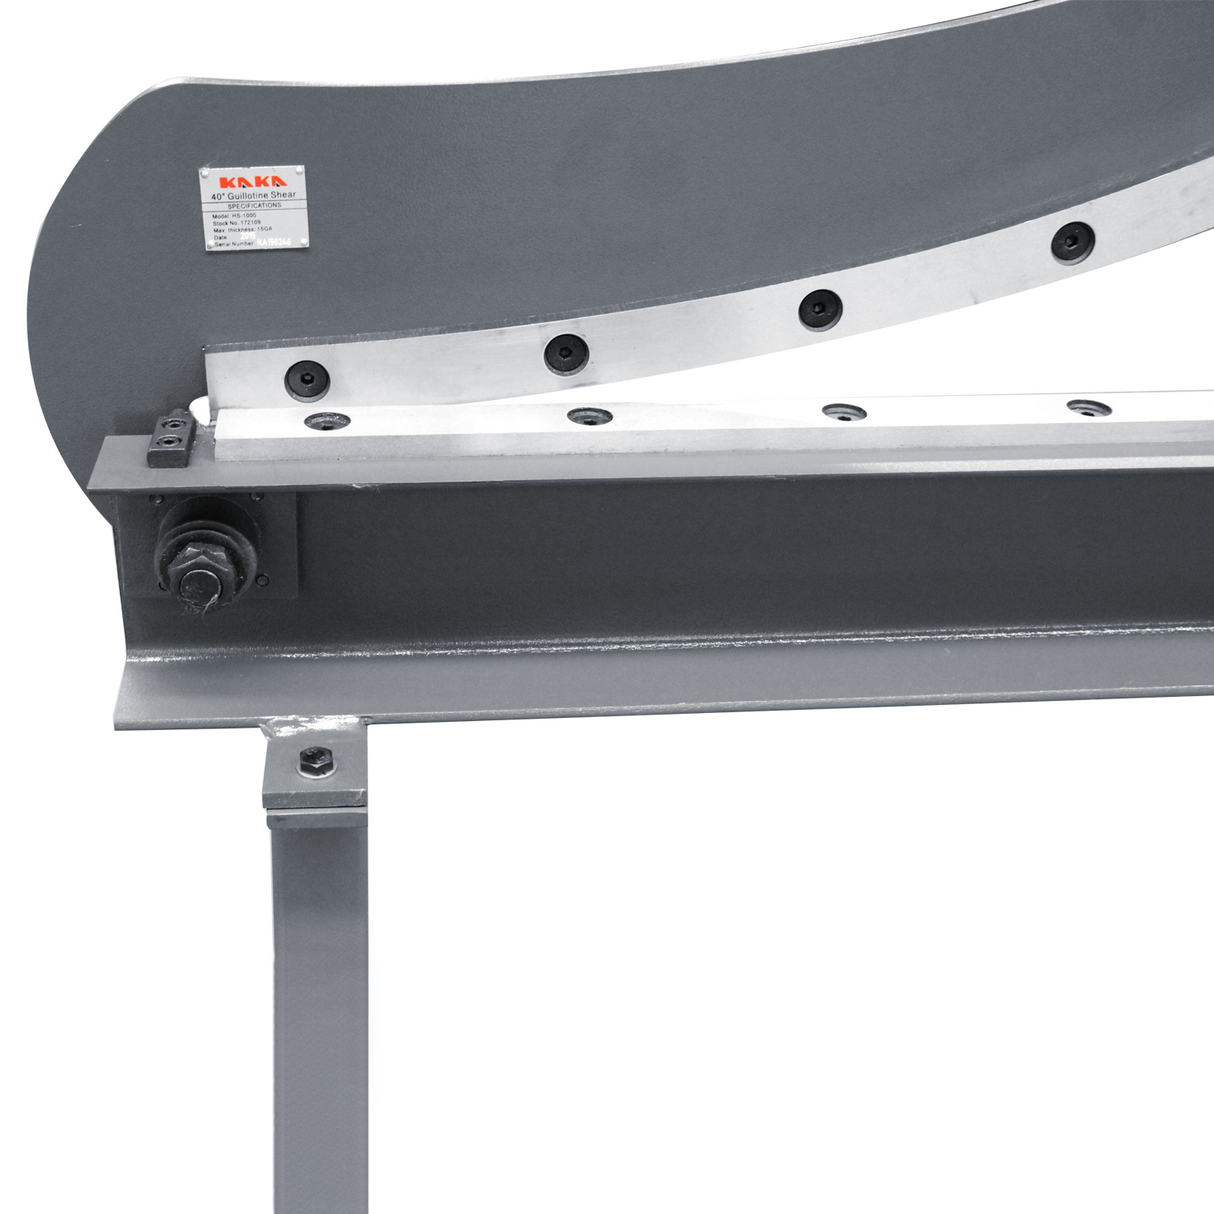 Kaka industrial HS-40 Guillotine Metal Shear, 39 inch Bed Width, 16 Gauge Metal Guillotine Shear with a Stand for Construction Work Sheet Metal Fabrication Plate Cutting Cutter